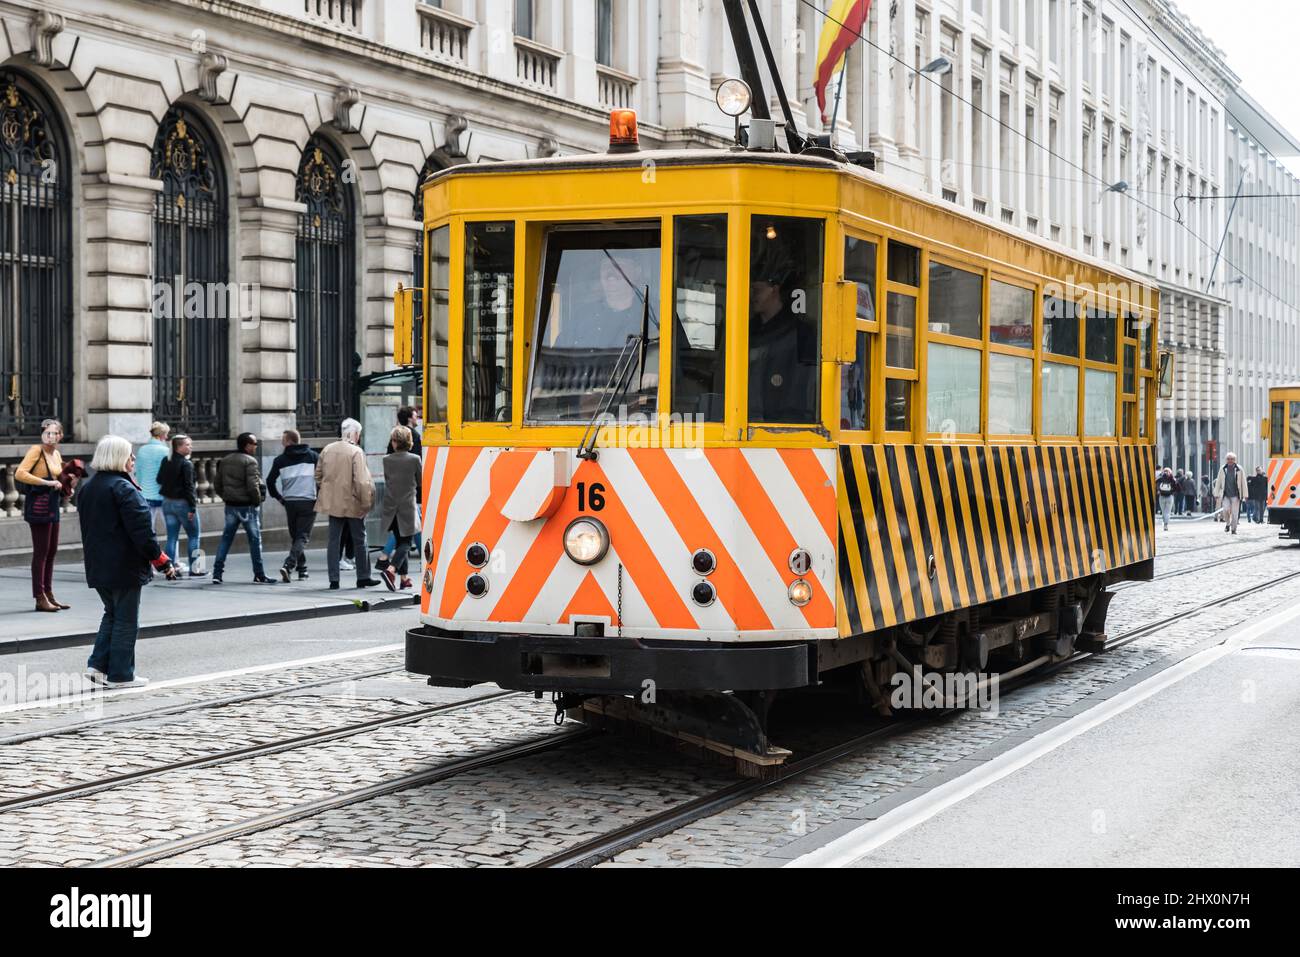 Brussels Old Town, Brussels Capital Region - Belgium - 05 01 2019 - Service tram for towing and reparation during the 150 tramways celebration Stock Photo